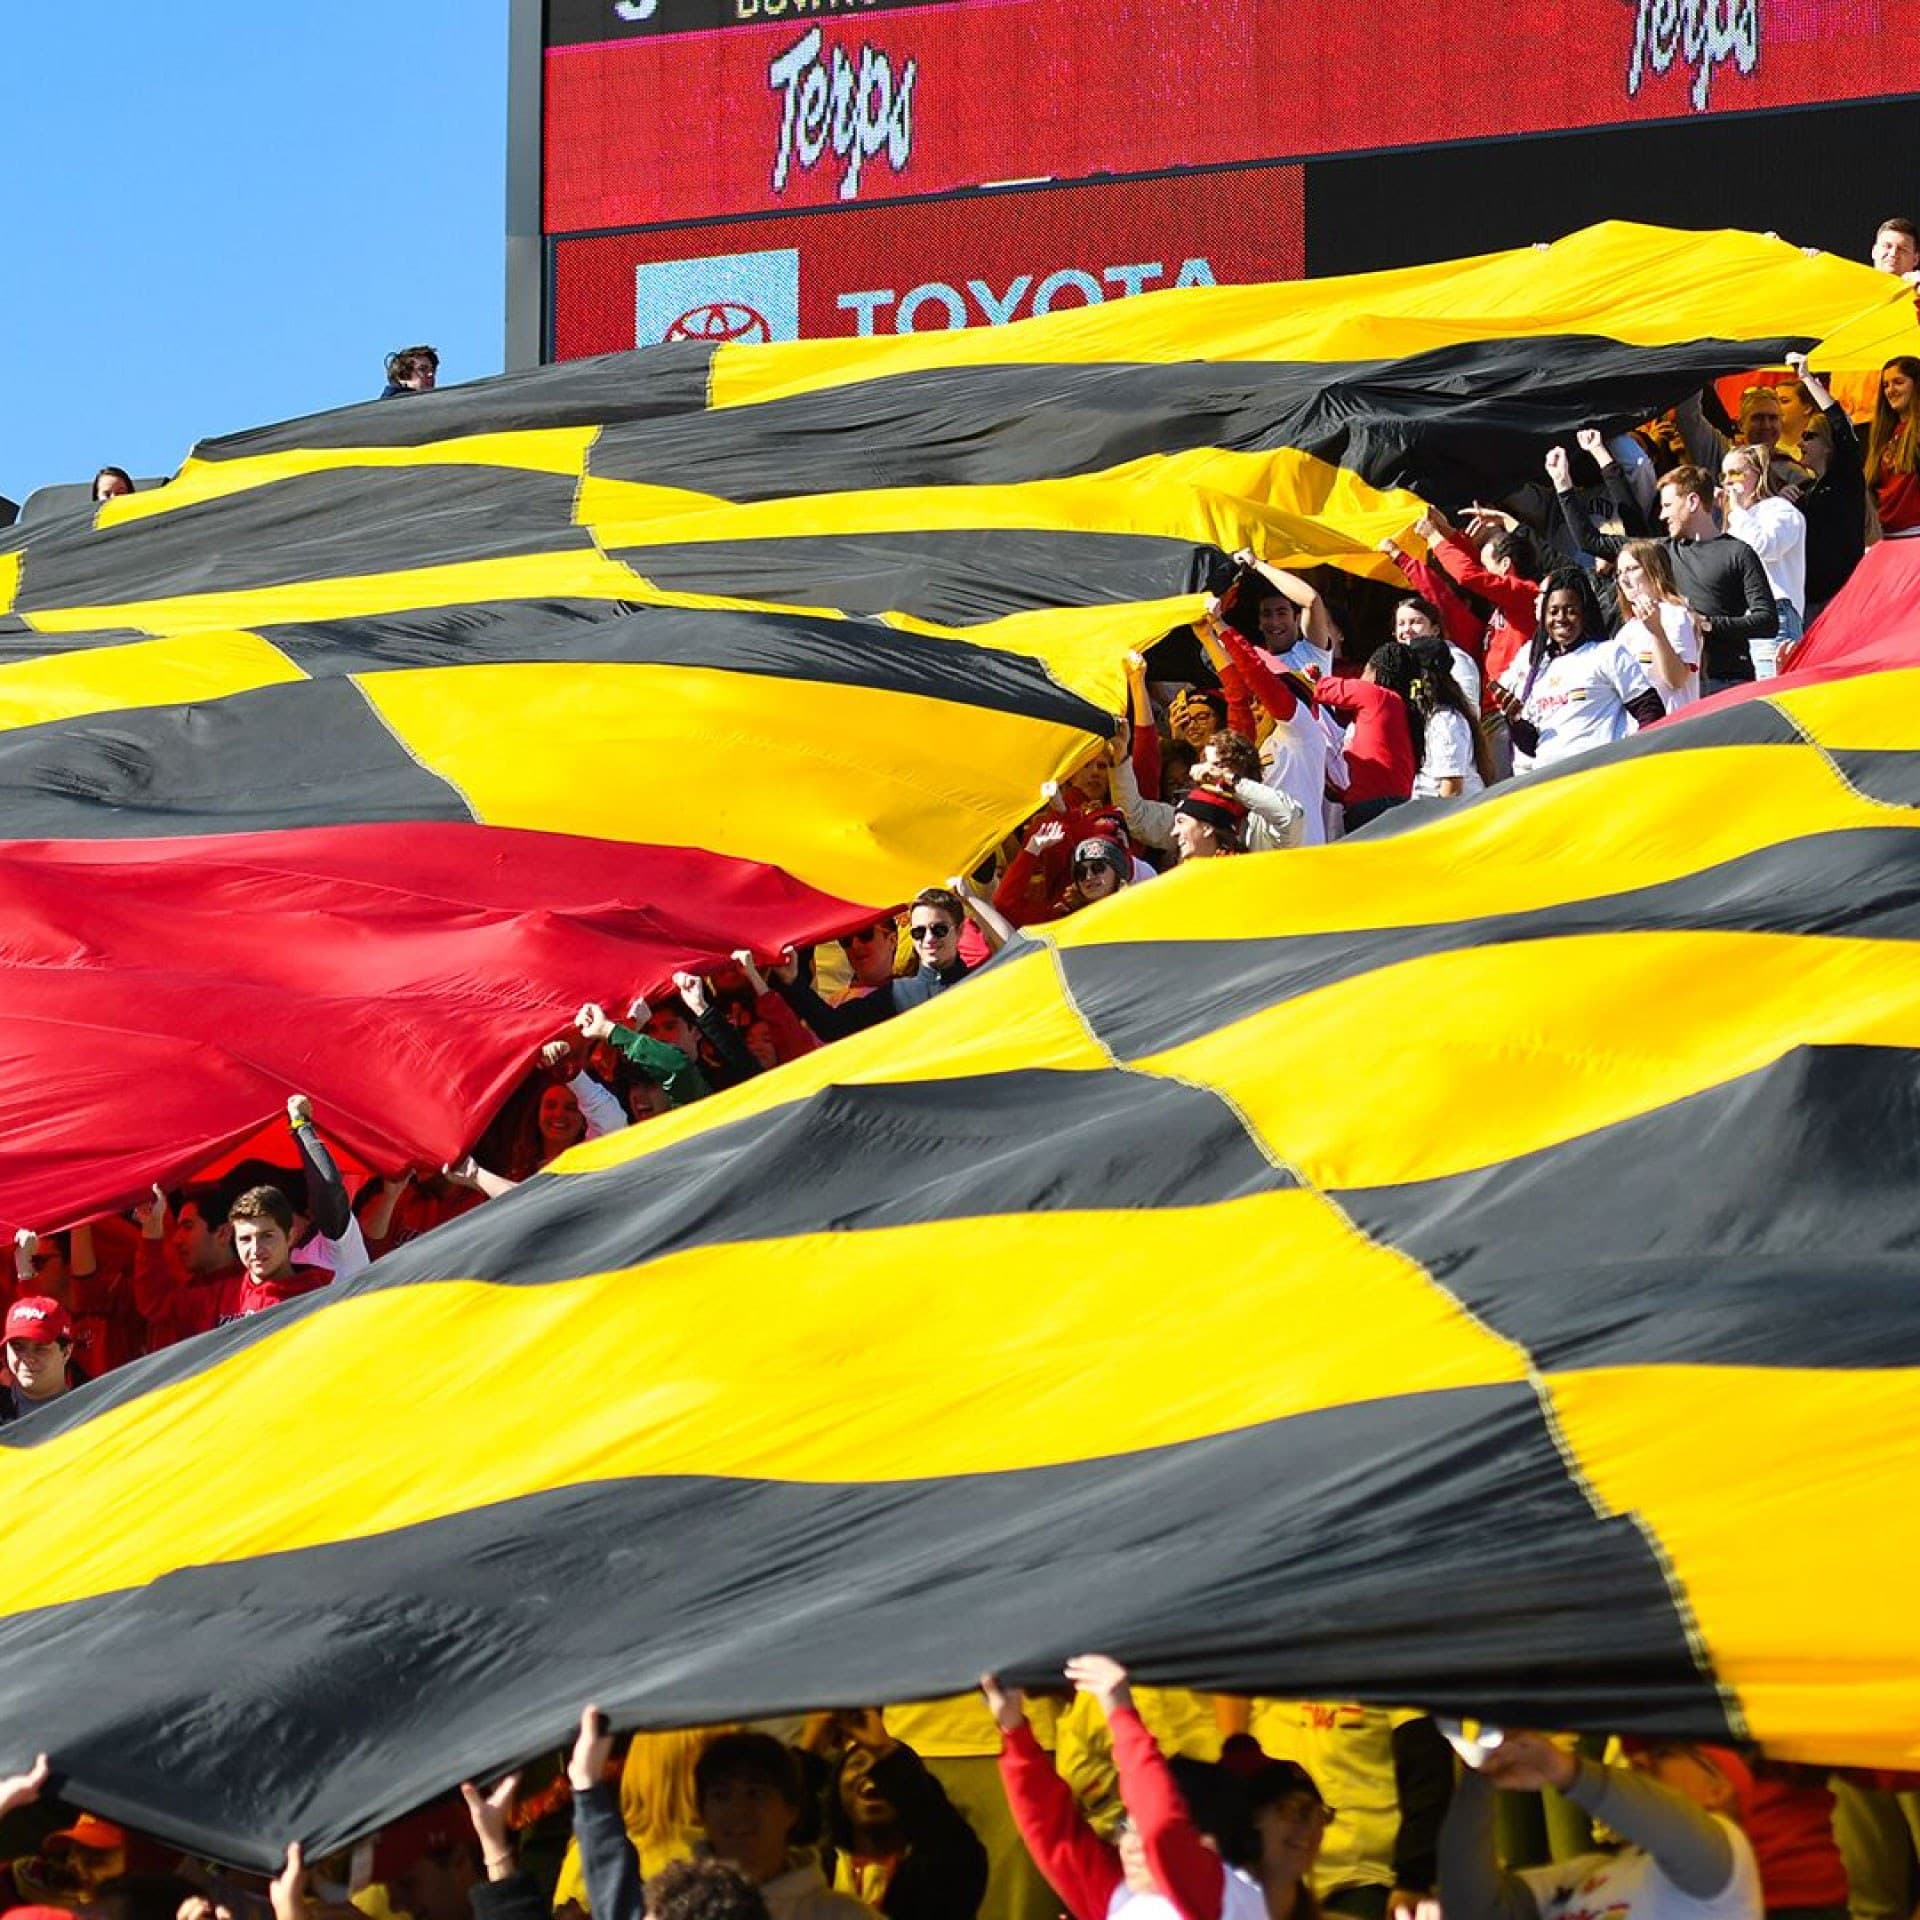 The Maryland flag is being held and waved during Homecoming at UMD.